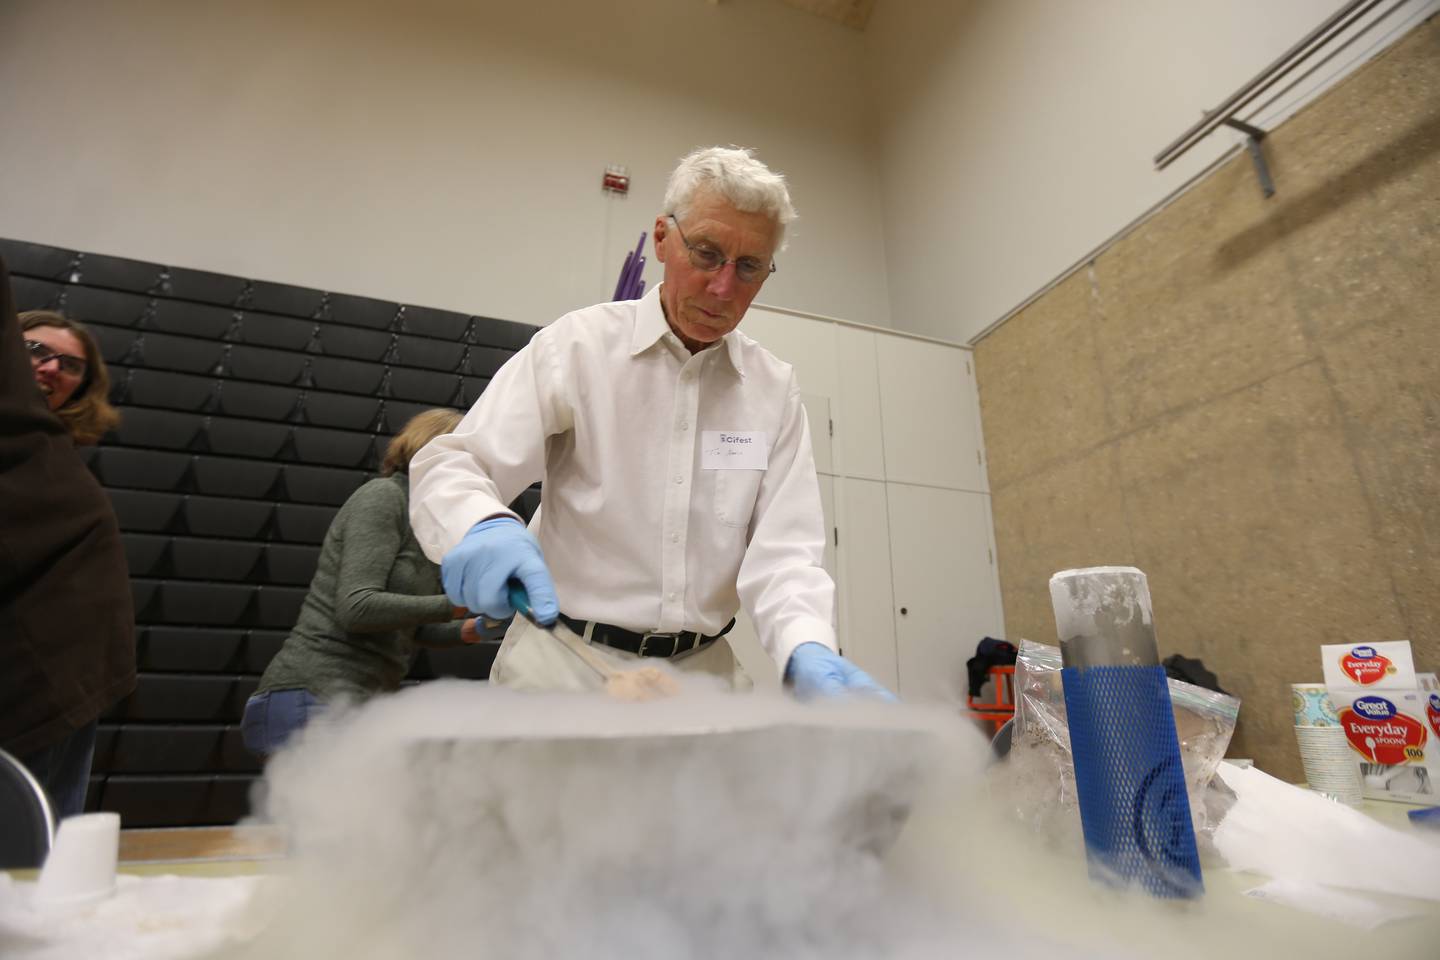 Tim Nagel prepares ice cream during the annual Scifest on Friday, April 21, at Illinois Valley Community College  in Oglesby.